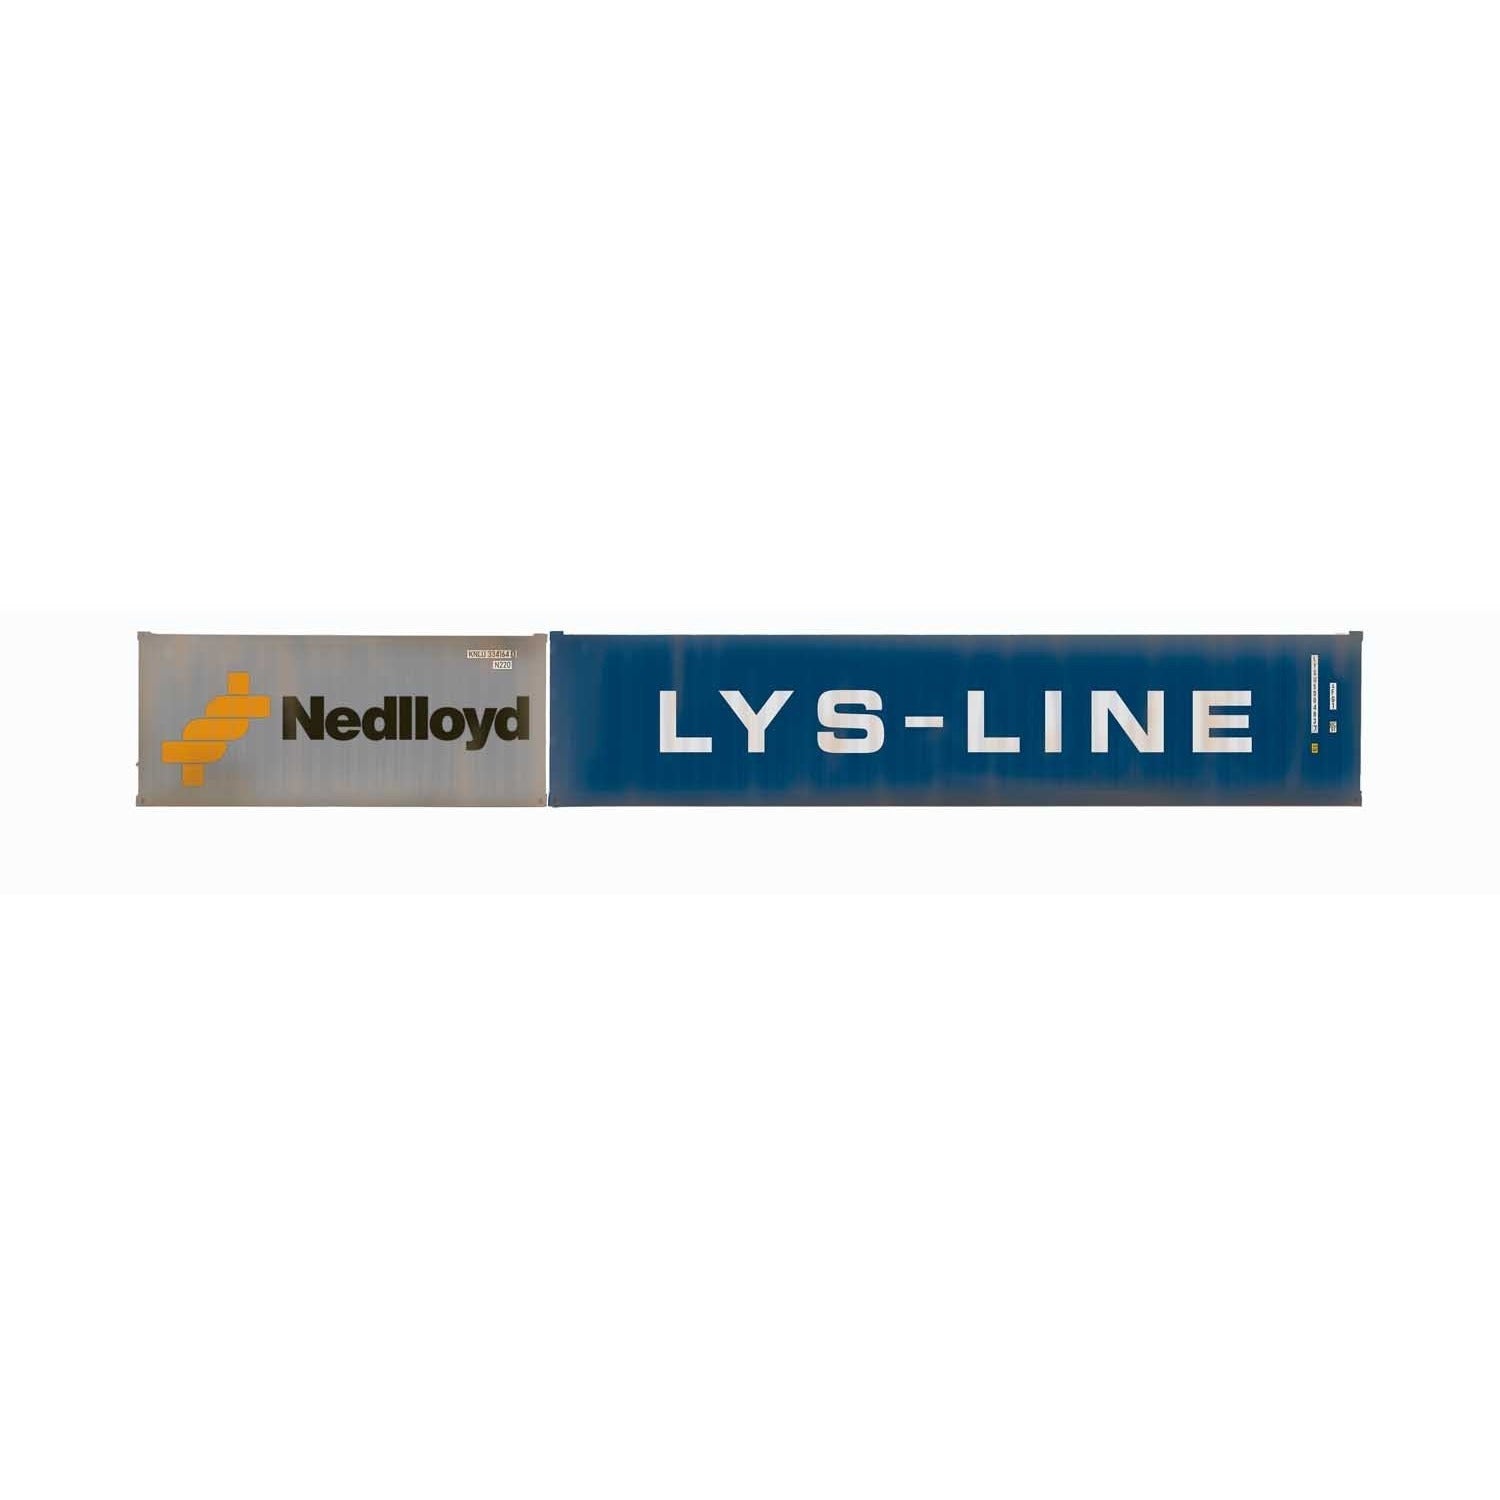 HORNBY Nedlloyd & LYS-Line, Container Pack, 1 x 20 and 1 x 40' LYS Linje Container